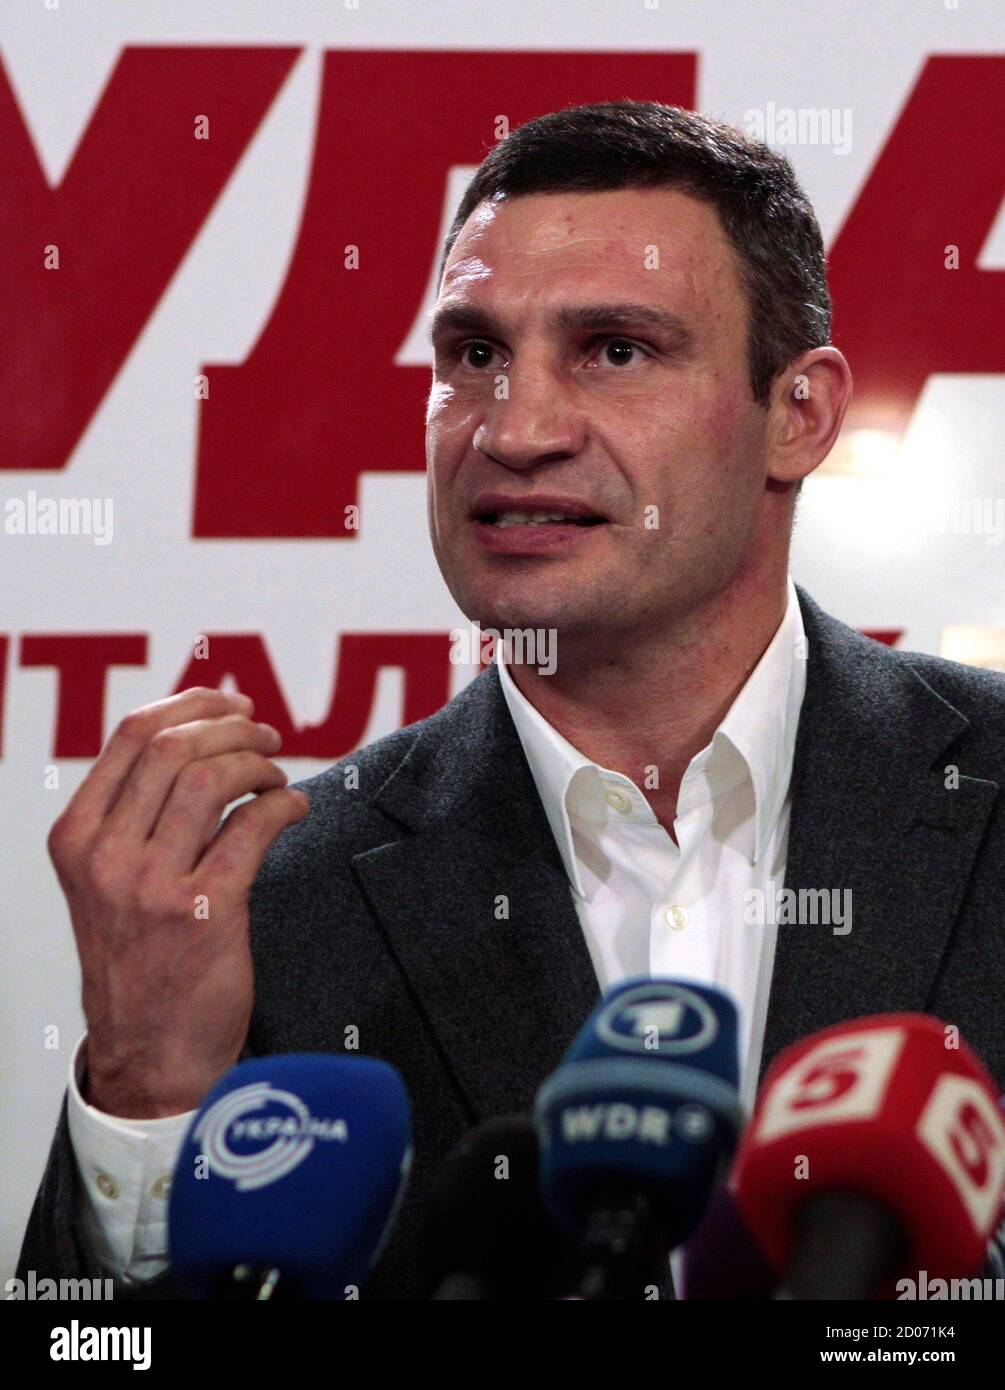 Heavyweight boxing champion and UDAR (Punch) party leader Vitaly Klitschko speaks at his party's election headquarters in Kiev, October 28, 2012. Ukrainian President Viktor Yanukovich's pro-business ruling party led in a national election on Sunday and seemed likely to keep its majority in parliament, exit polls showed, despite a strong showing by the combined opposition.  REUTERS/Vasily Fedosenko (UKRAINE - Tags: SPORT BOXING POLITICS ELECTIONS) Stock Photo